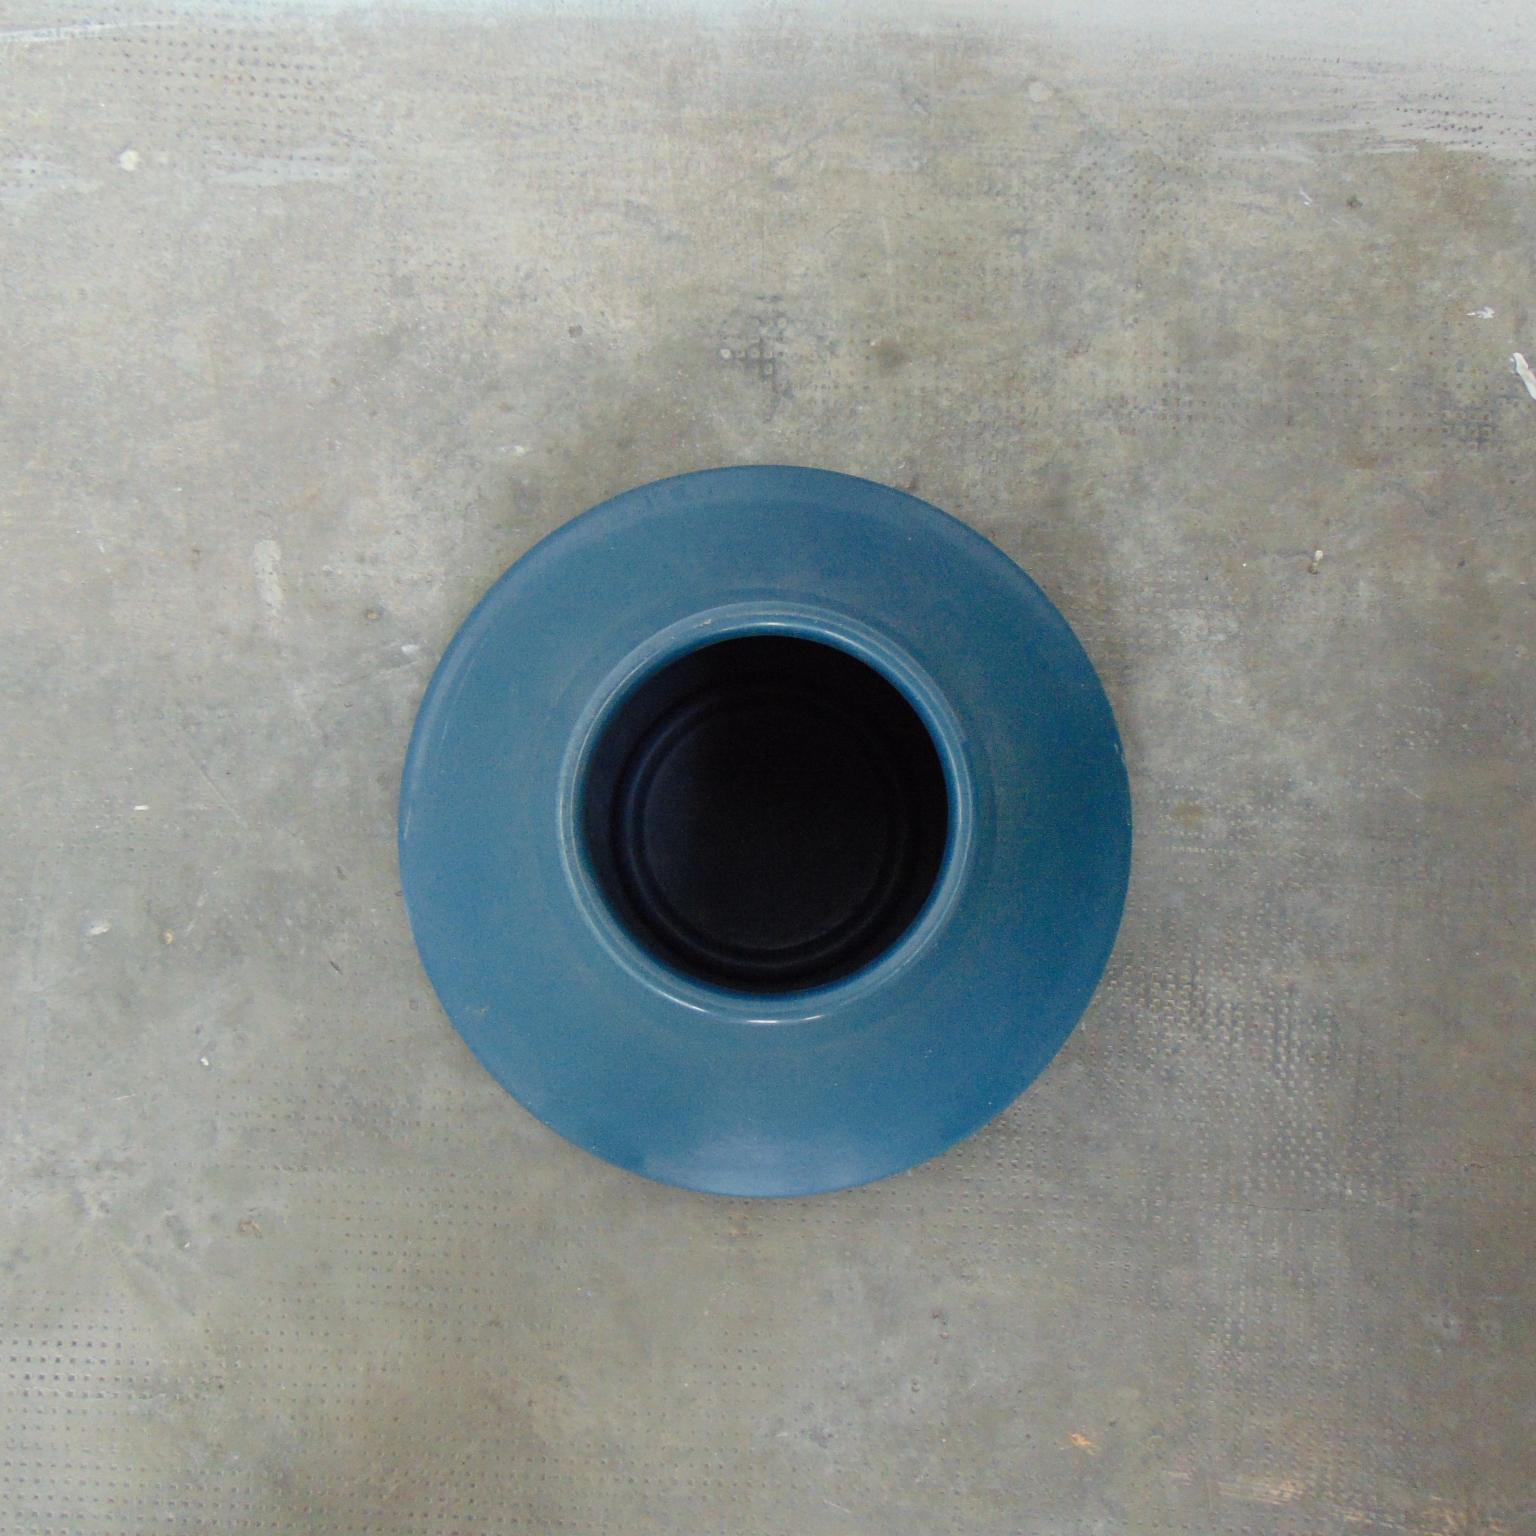 1972 Umbrella Stand in Blue Thermoformed Plastic by R. Lera for Sormani, Italy For Sale 4